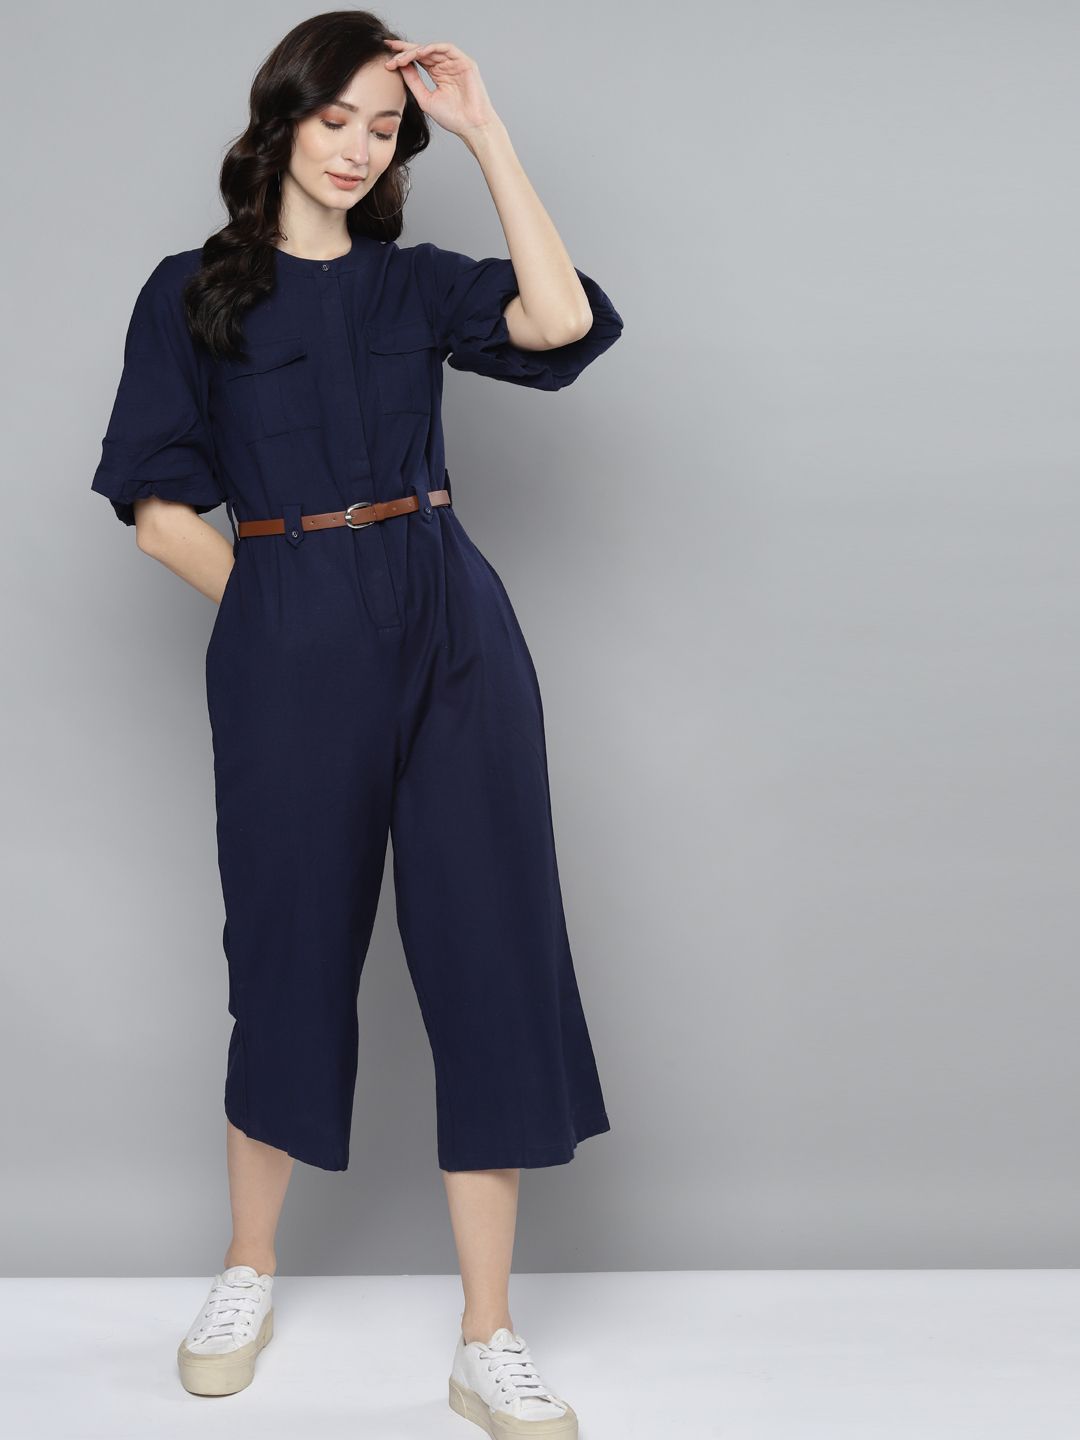 Femella Navy Blue Solid Basic Jumpsuit Price in India